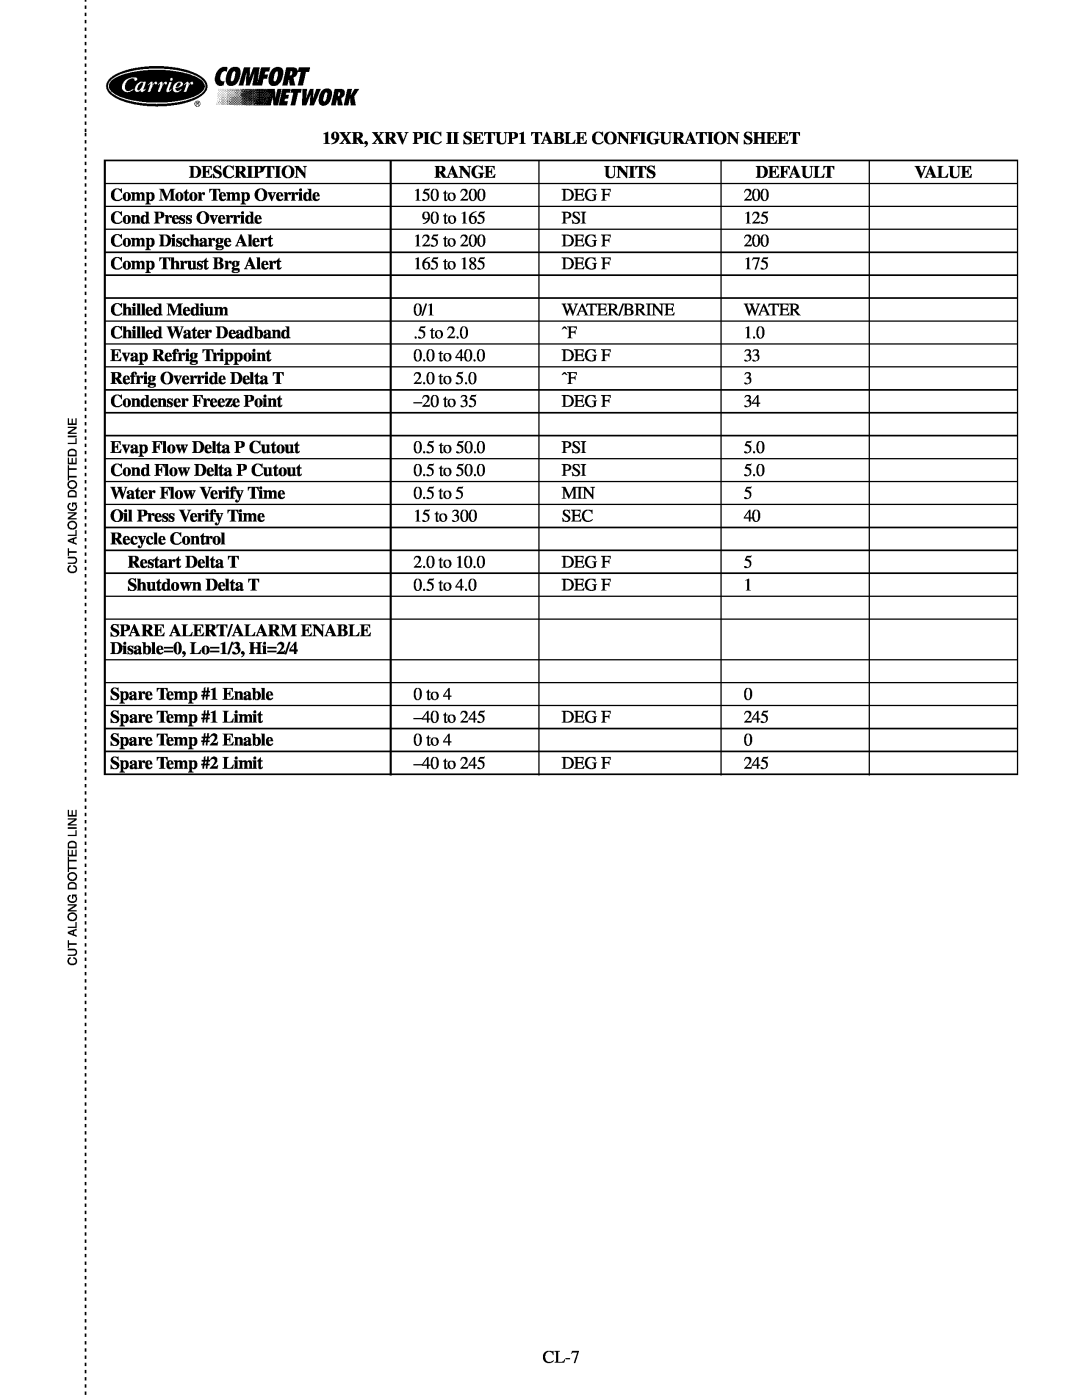 Carrier specifications 19XR, XRV PIC II SETUP1 TABLE CONFIGURATION SHEET 